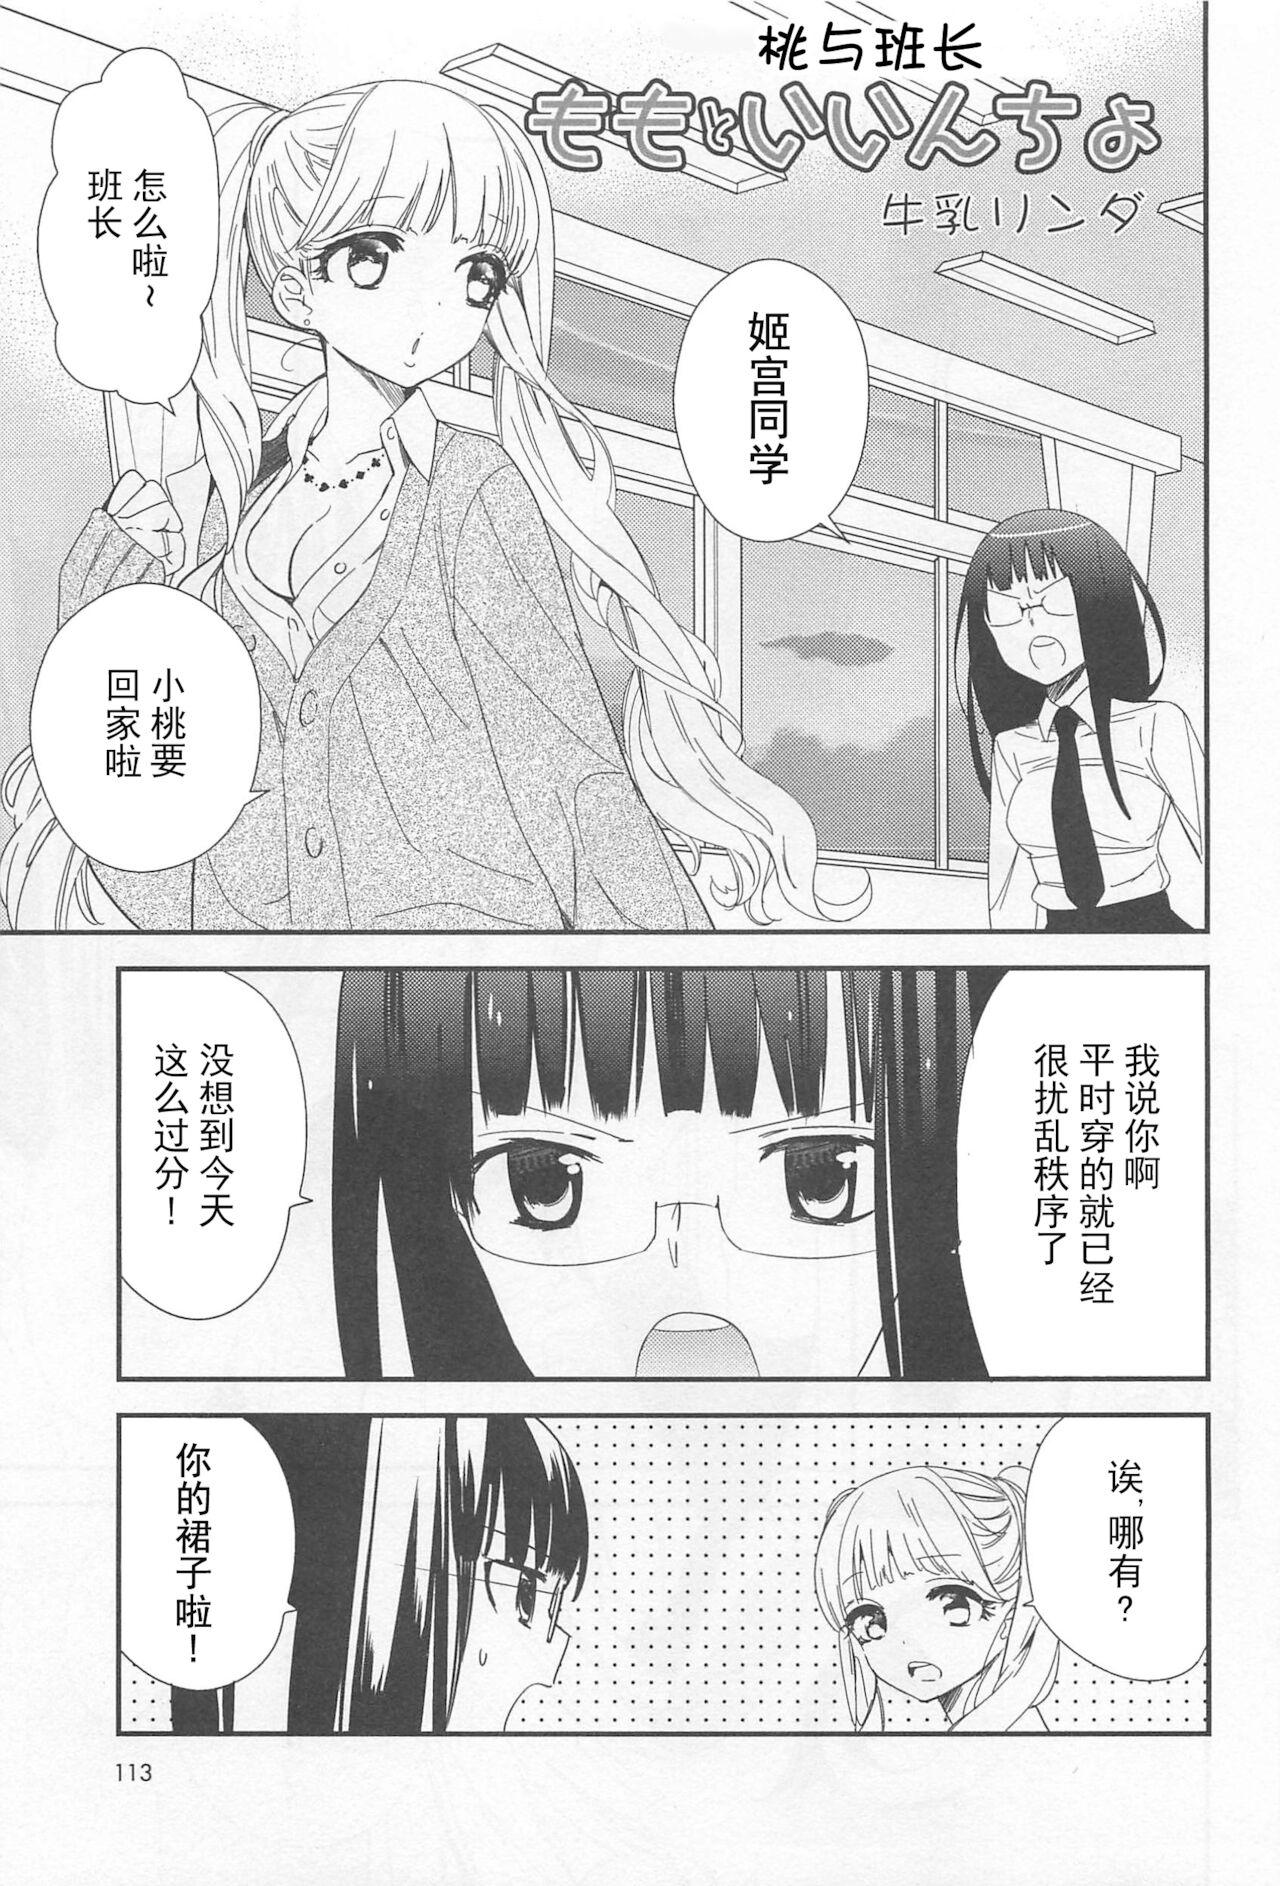 Masterbate Momo to Iincho | 桃与班长 Blondes - Page 1